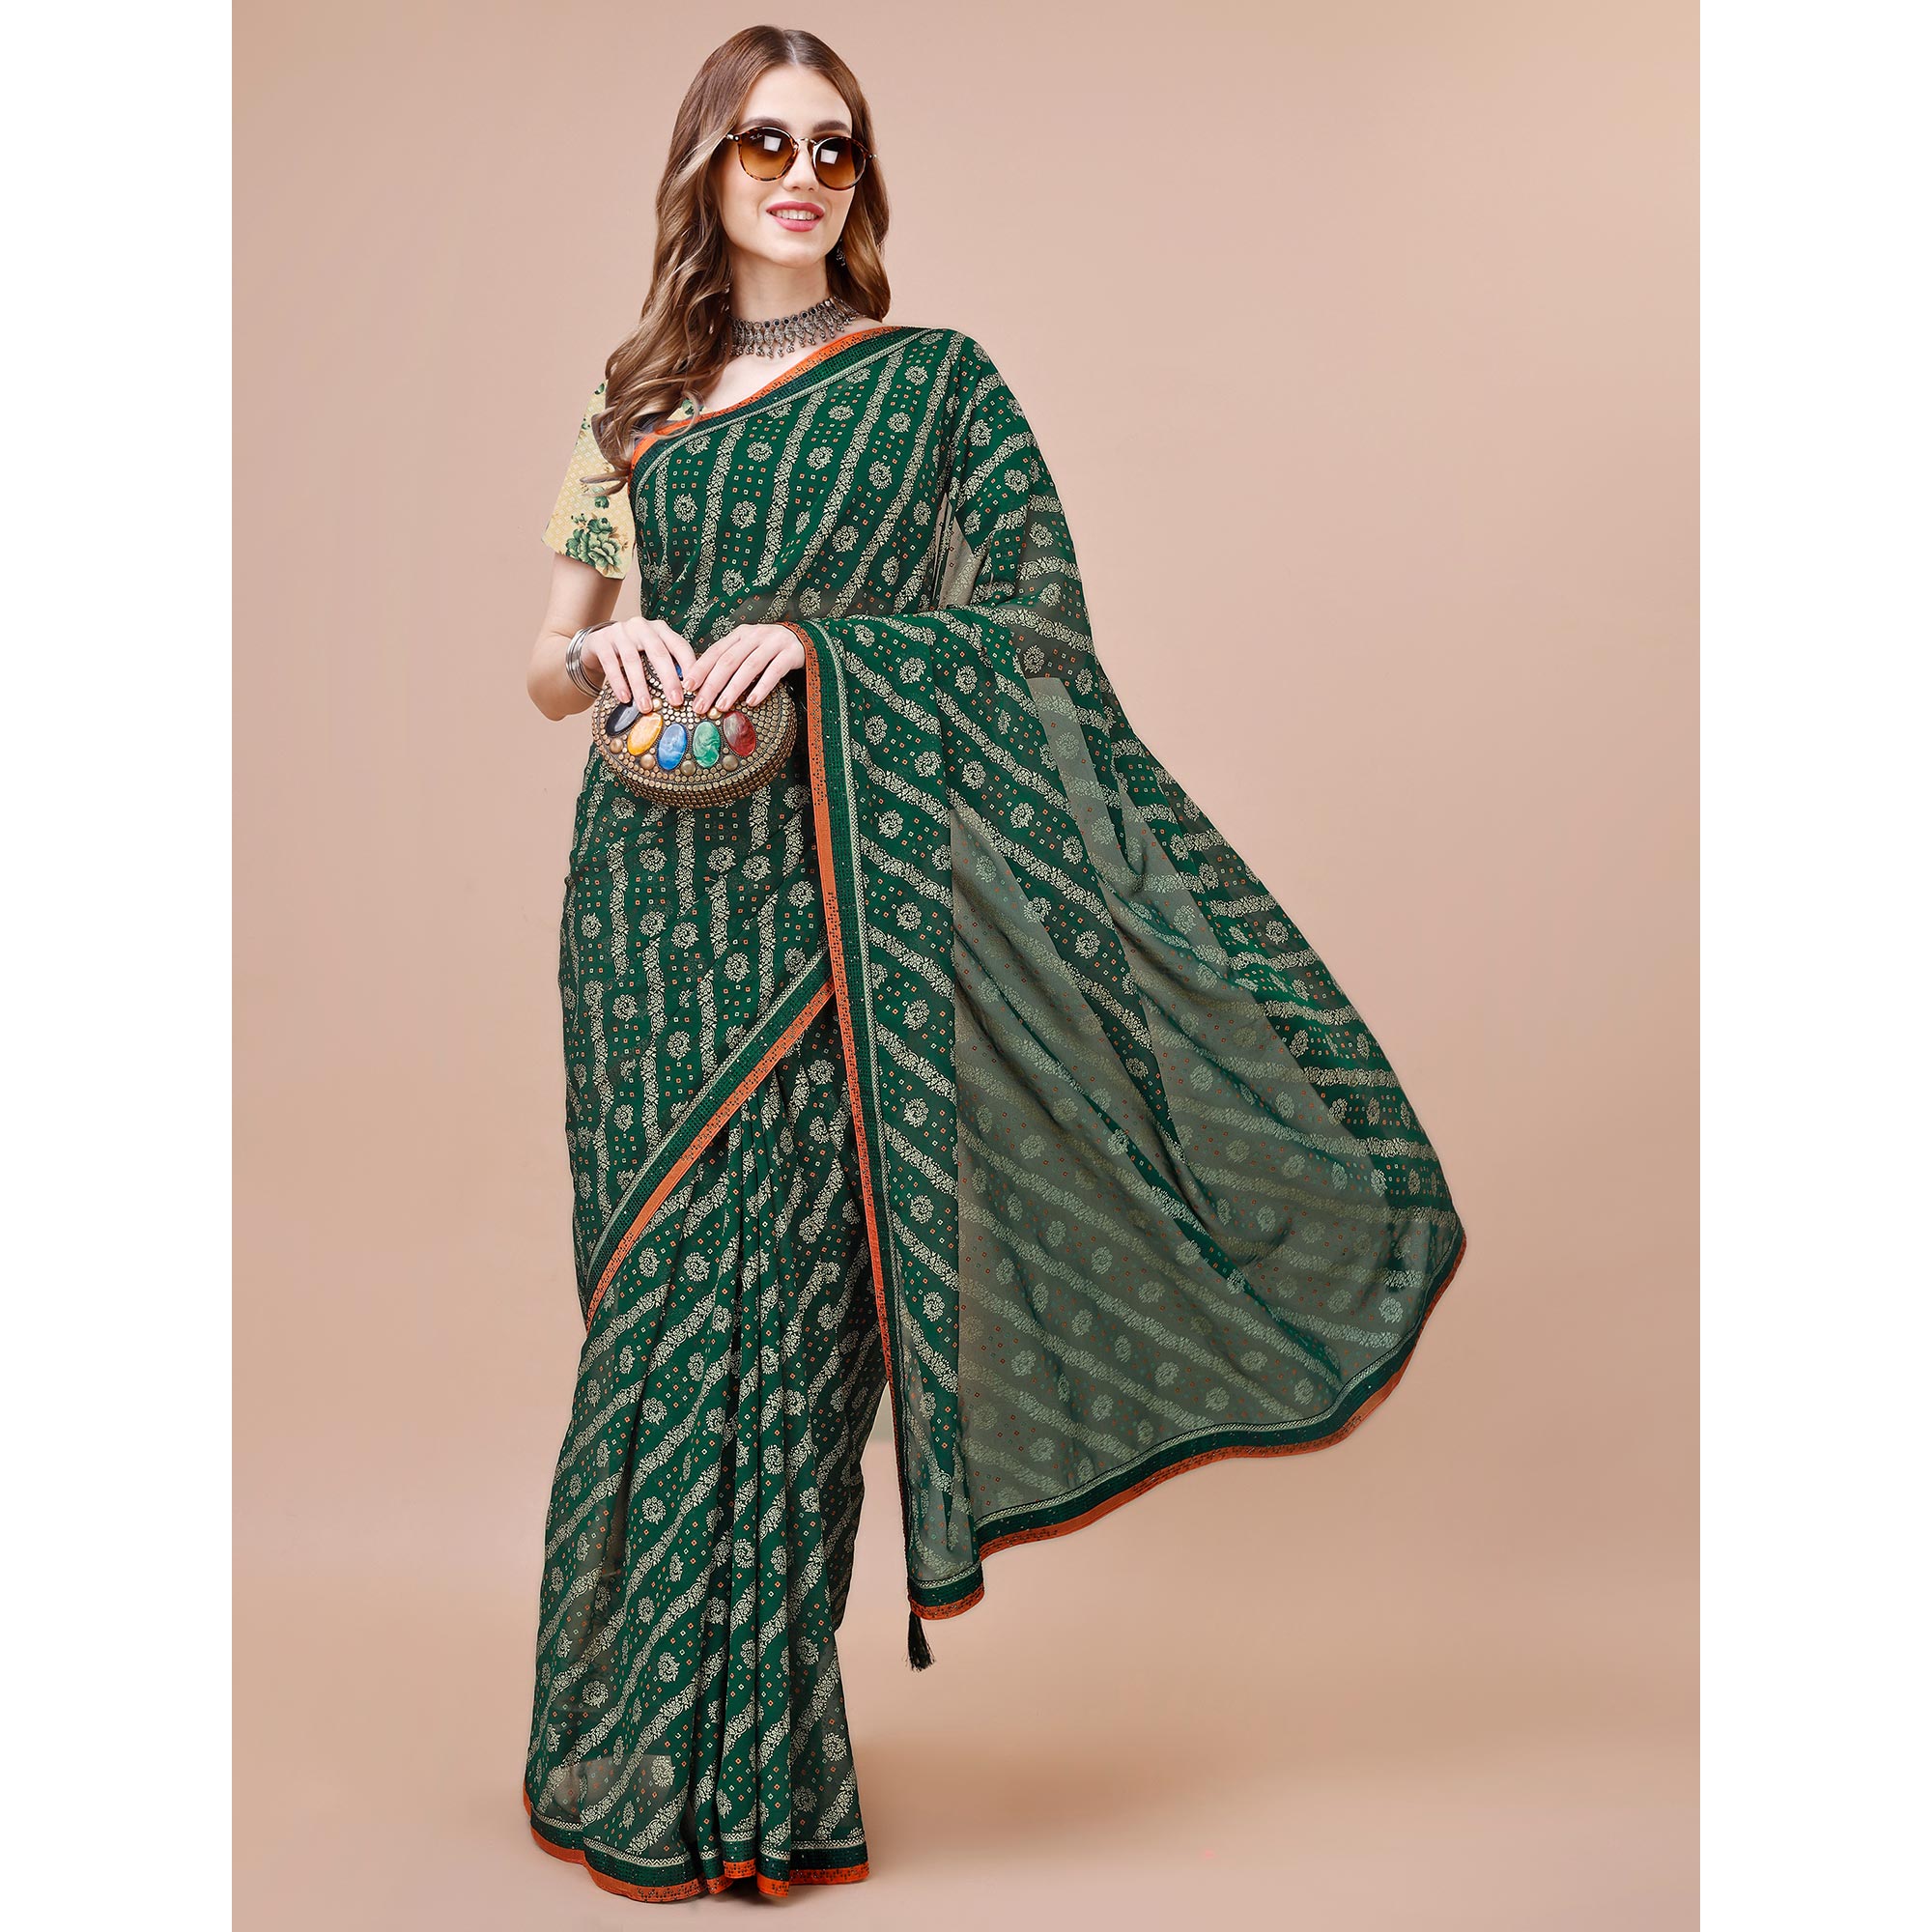 Green Floral Foil Printed Chiffon Saree With Lace Border